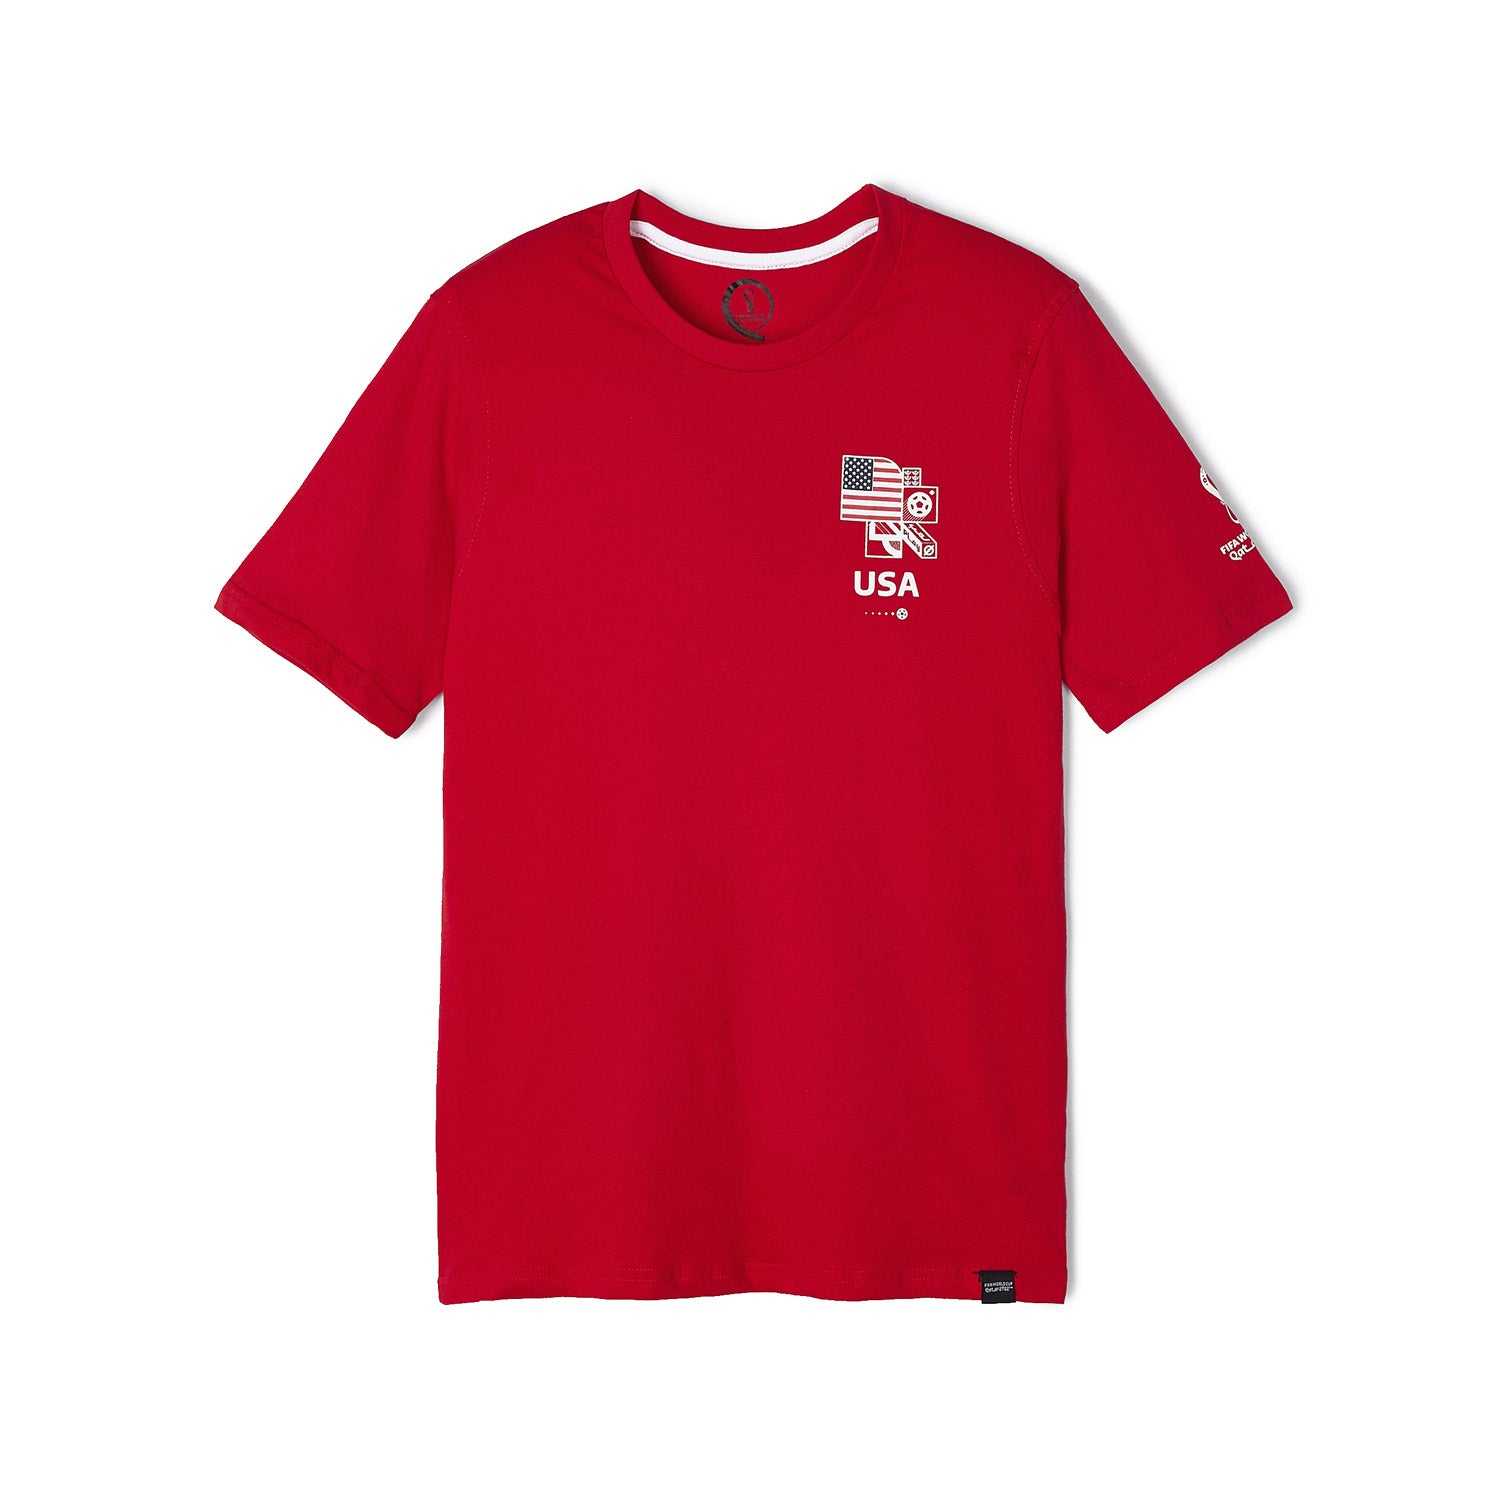 2022 World Cup USA Red T-Shirt - Mens